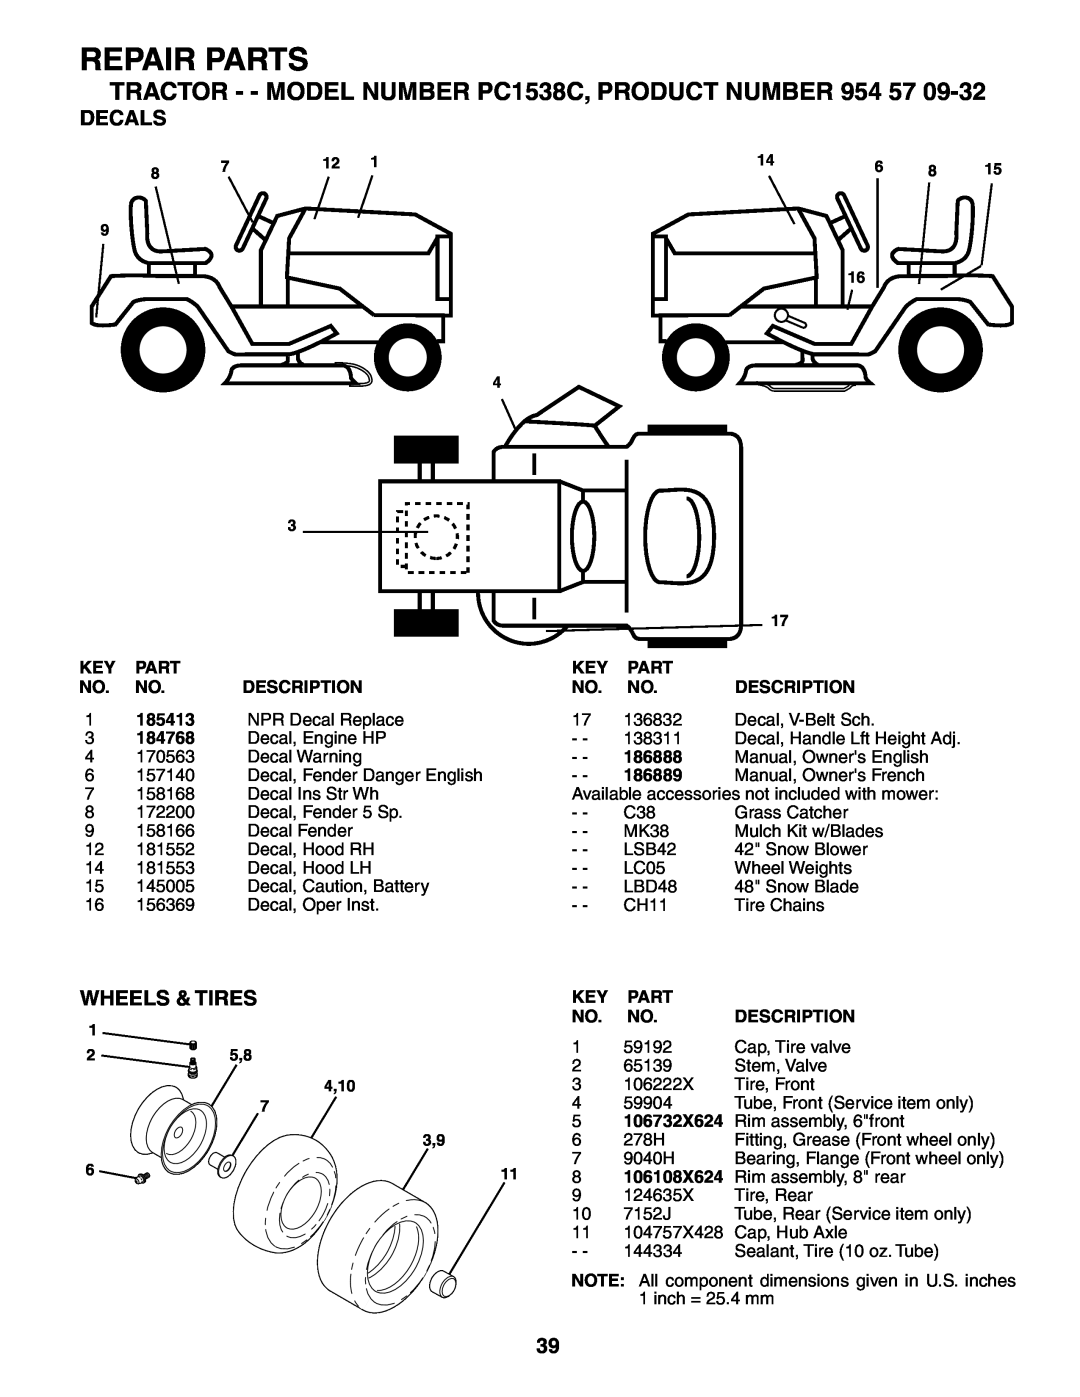 Poulan 186888, 954570932 manual Decals, Wheels & Tires, Repair Parts, TRACTOR - - MODEL NUMBER PC1538C, PRODUCT NUMBER, 4,10 